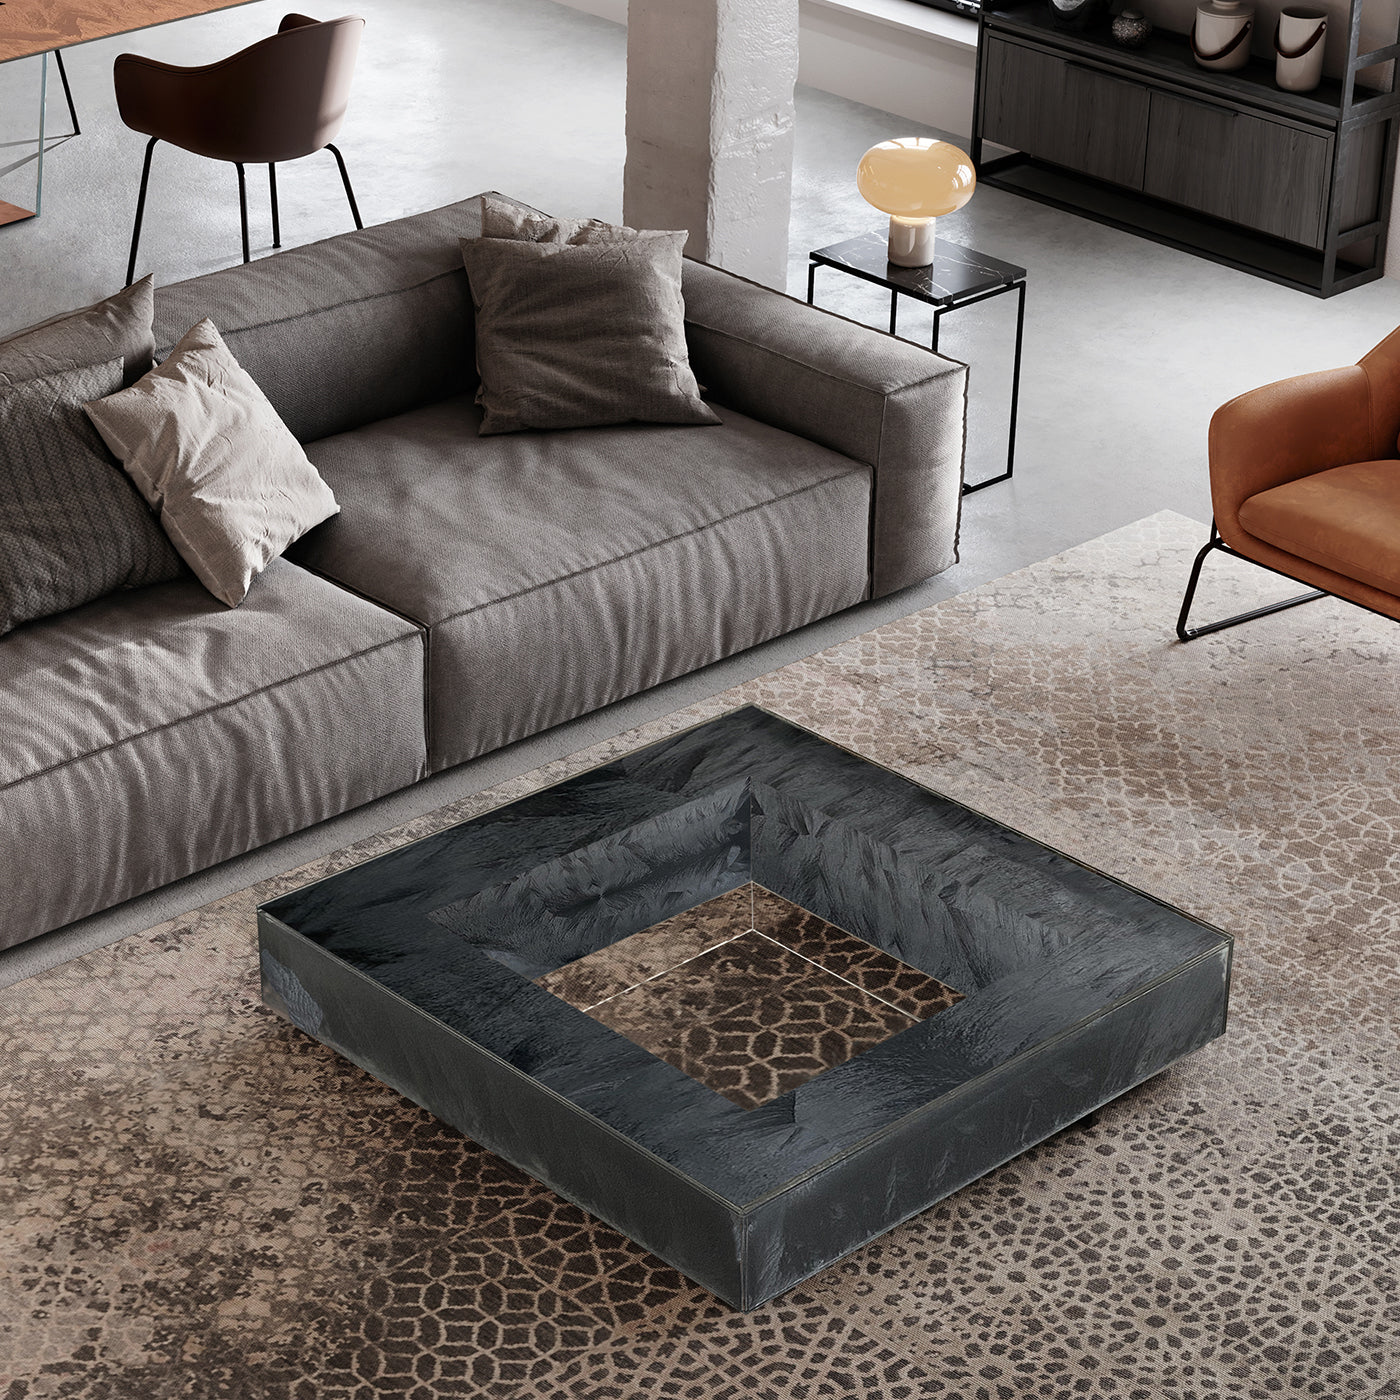 Kite Large Anthracite Coffee Table by Fabio Casali  - Alternative view 1